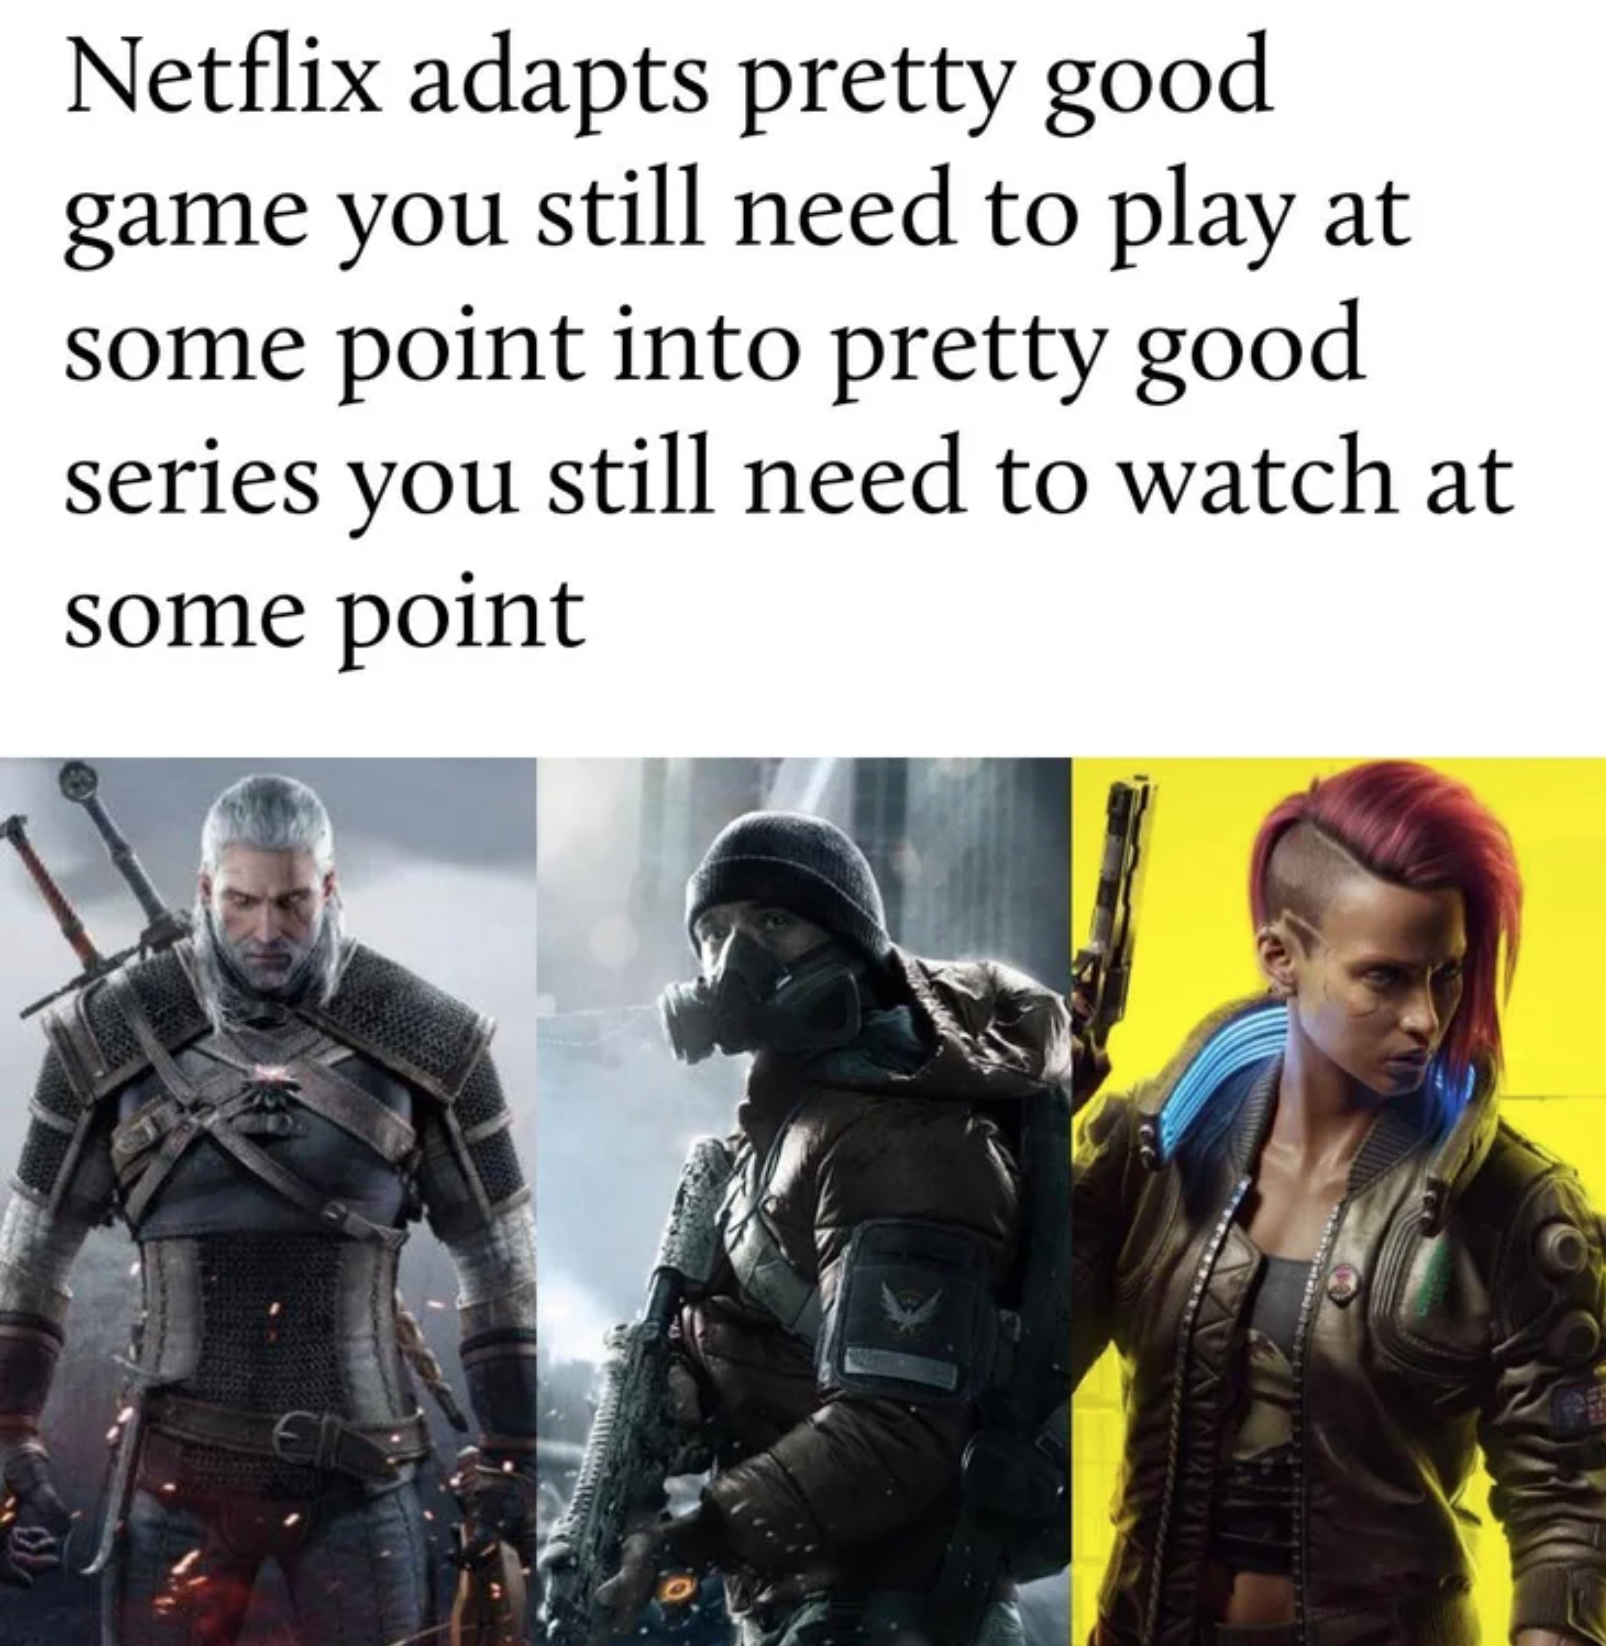 photo caption - Netflix adapts pretty good game you still need to play at some point into pretty good series you still need to watch at some point